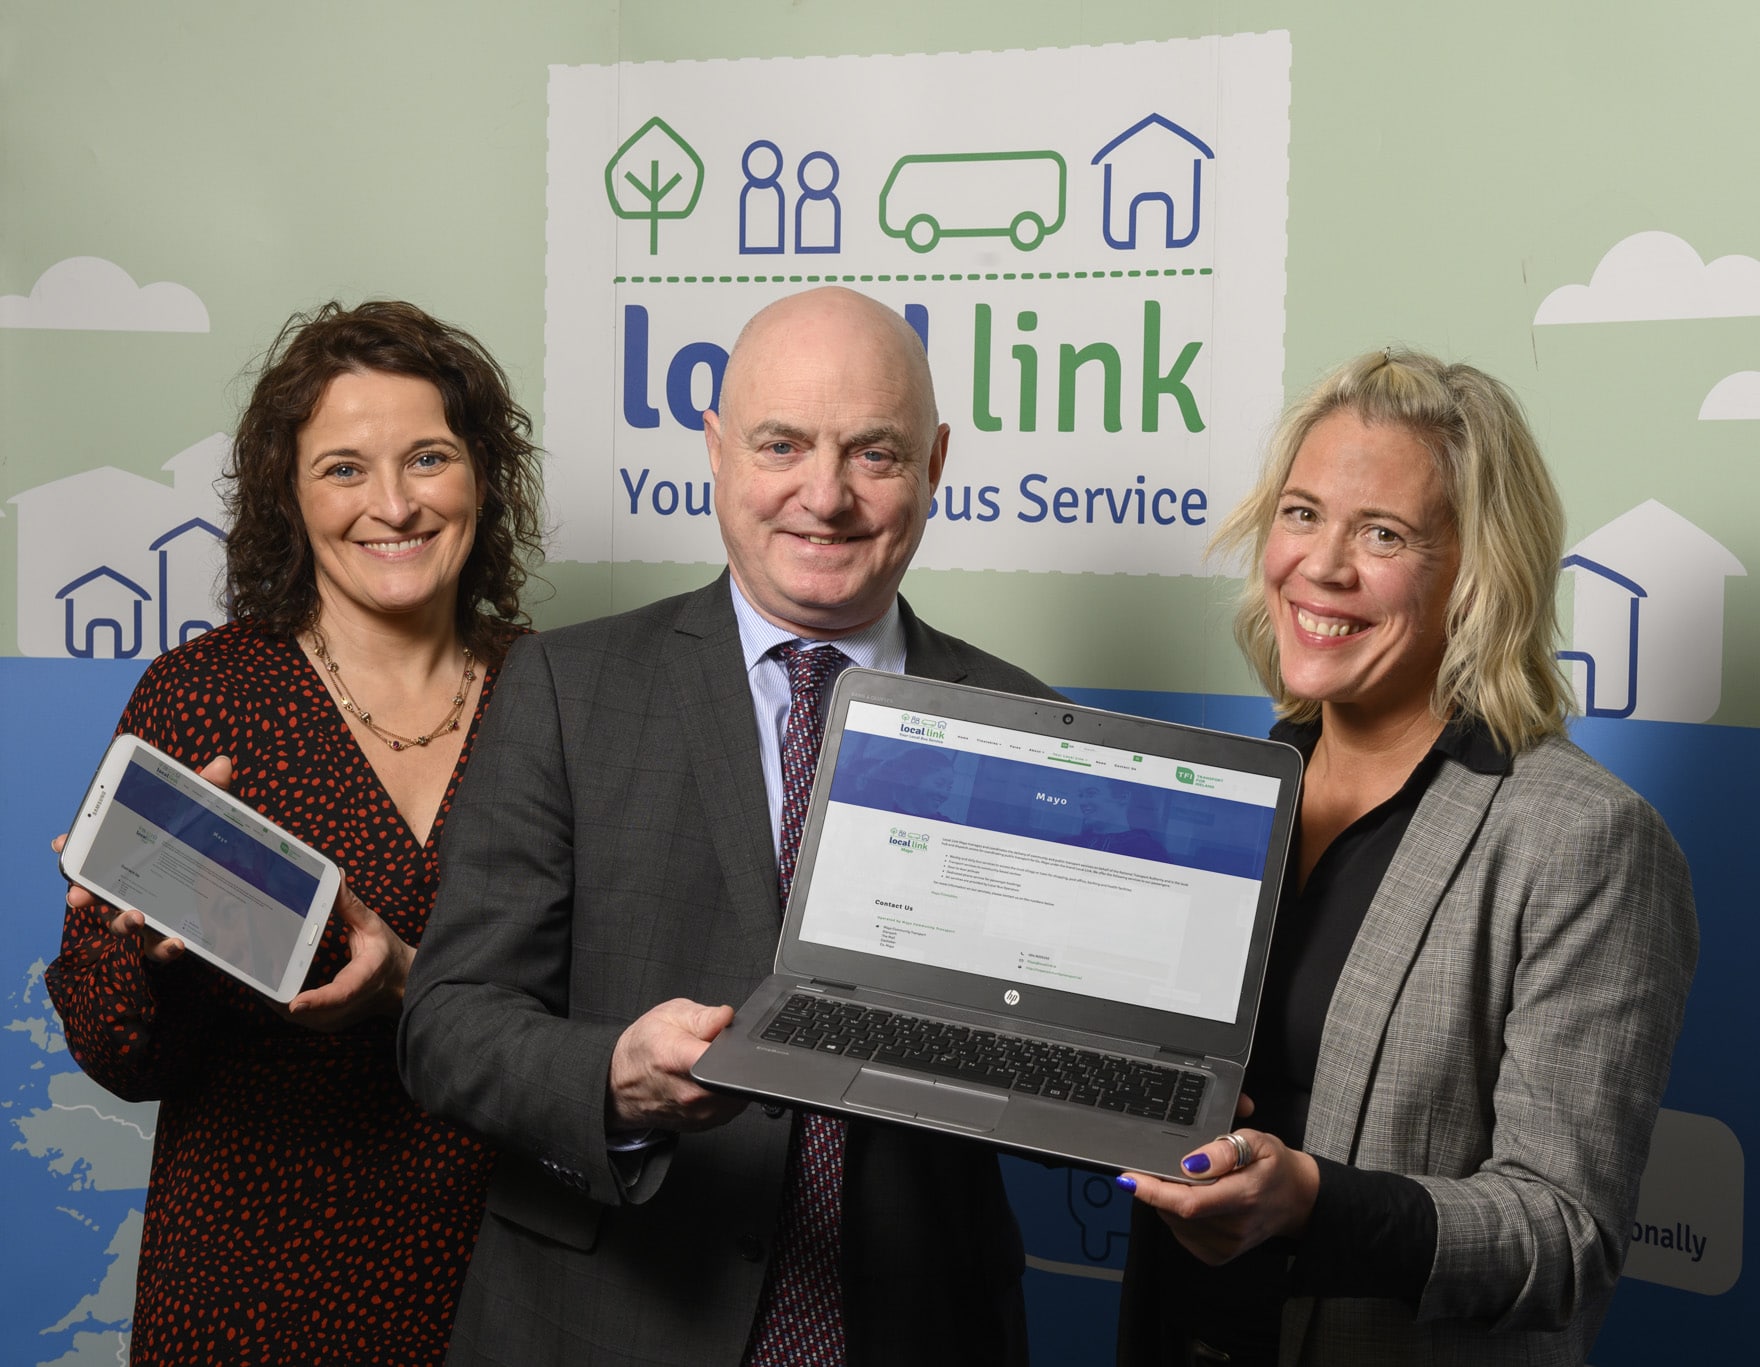 Sarah Togher, Peter Hynes and Orlagh Denneny pictured together for website launch